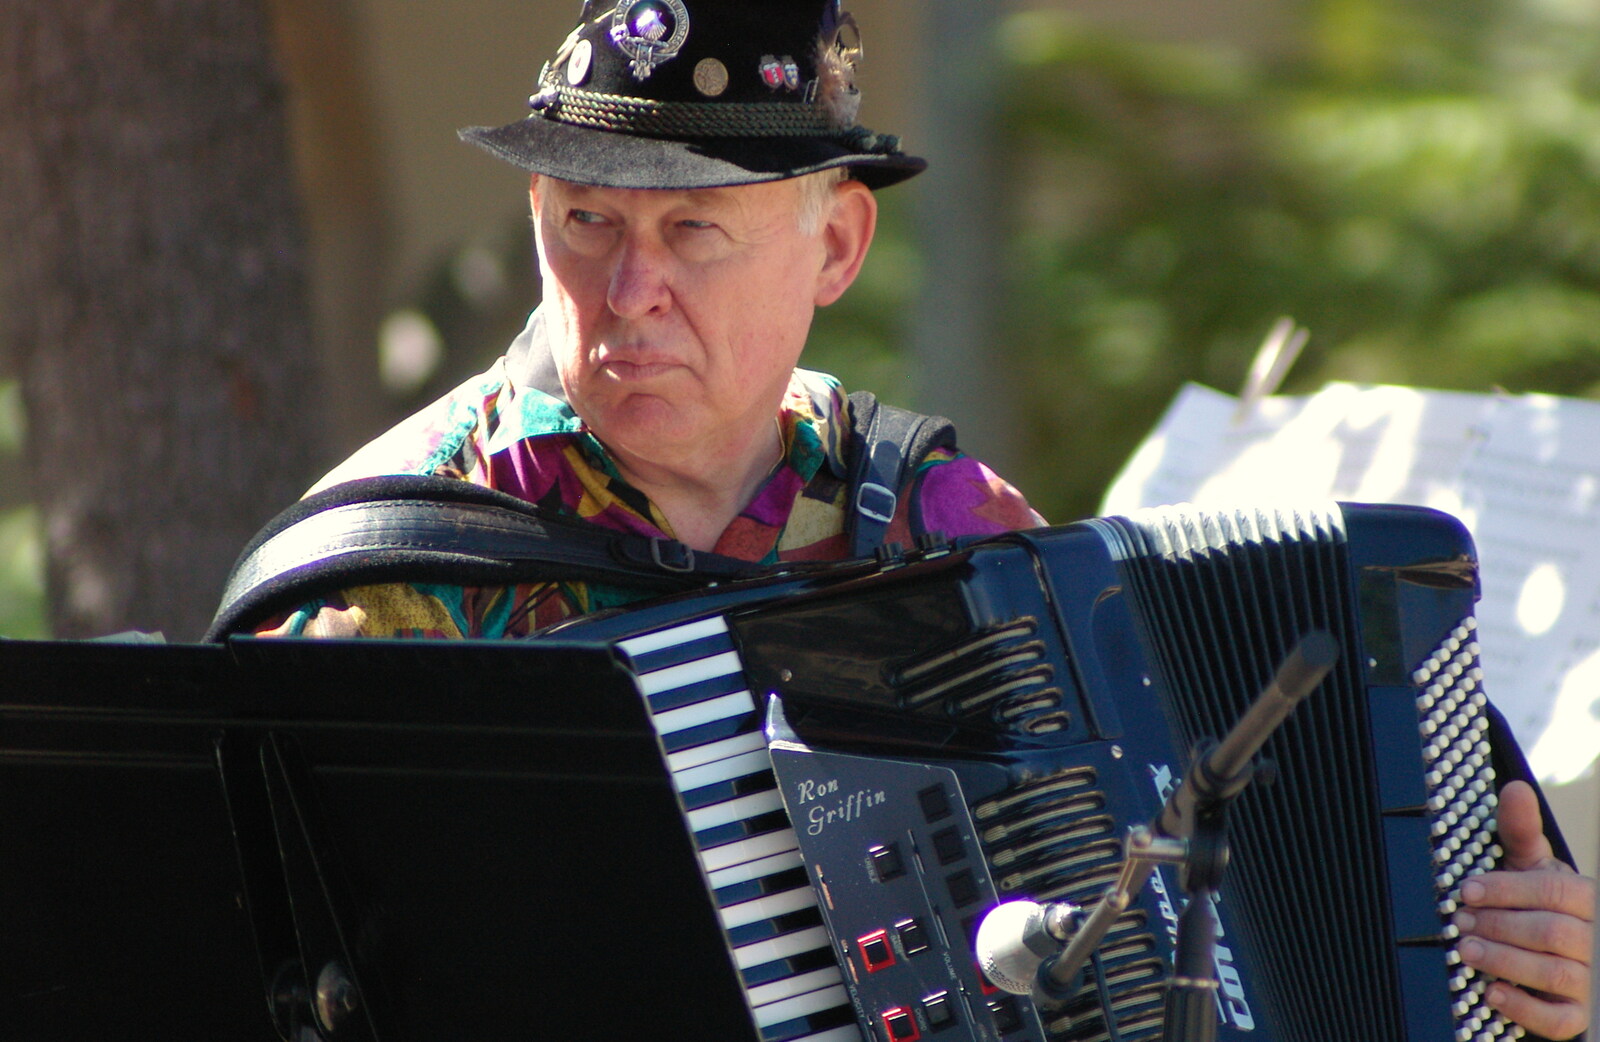 Scenes and People of Balboa Park, San Diego, California - 25th September 2005: The accordion player